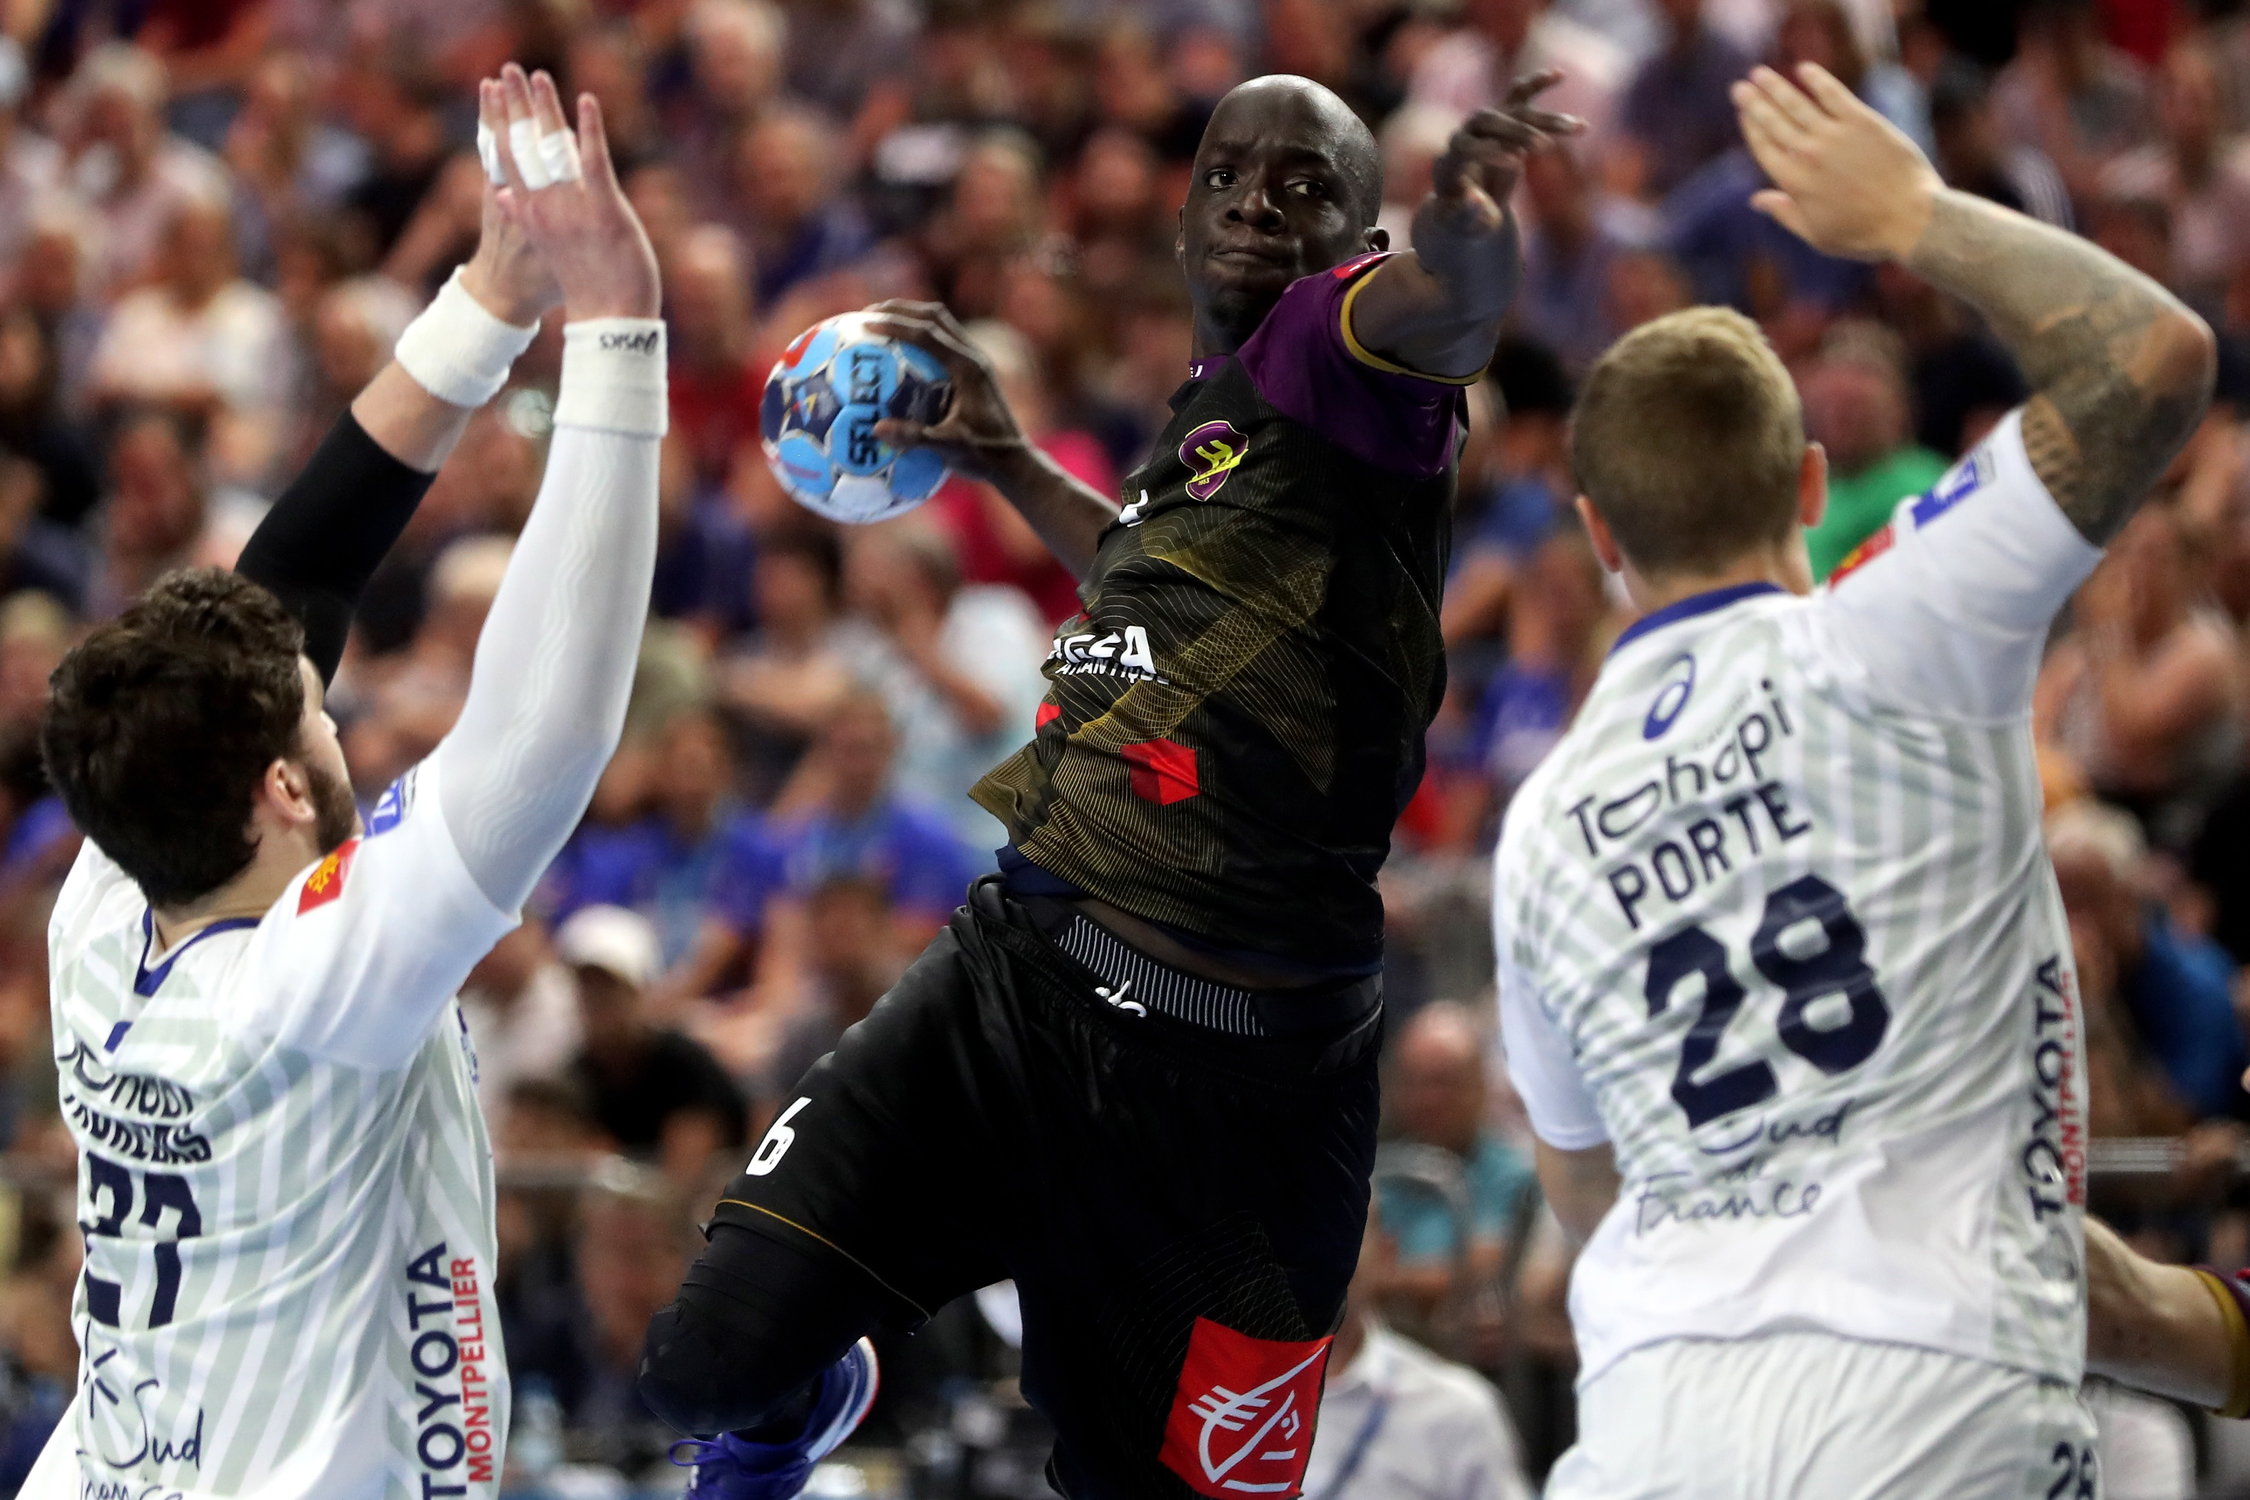 epa06767230 Nantes's Guy Olivier Nyokas (C) in action during the 2018 EHF FINAL4 Handball Champions League final match between HBC Nantes and Montpellier HB in Cologne, Germany, 27 May 2018.  EPA/FRIEDEMANN VOGEL